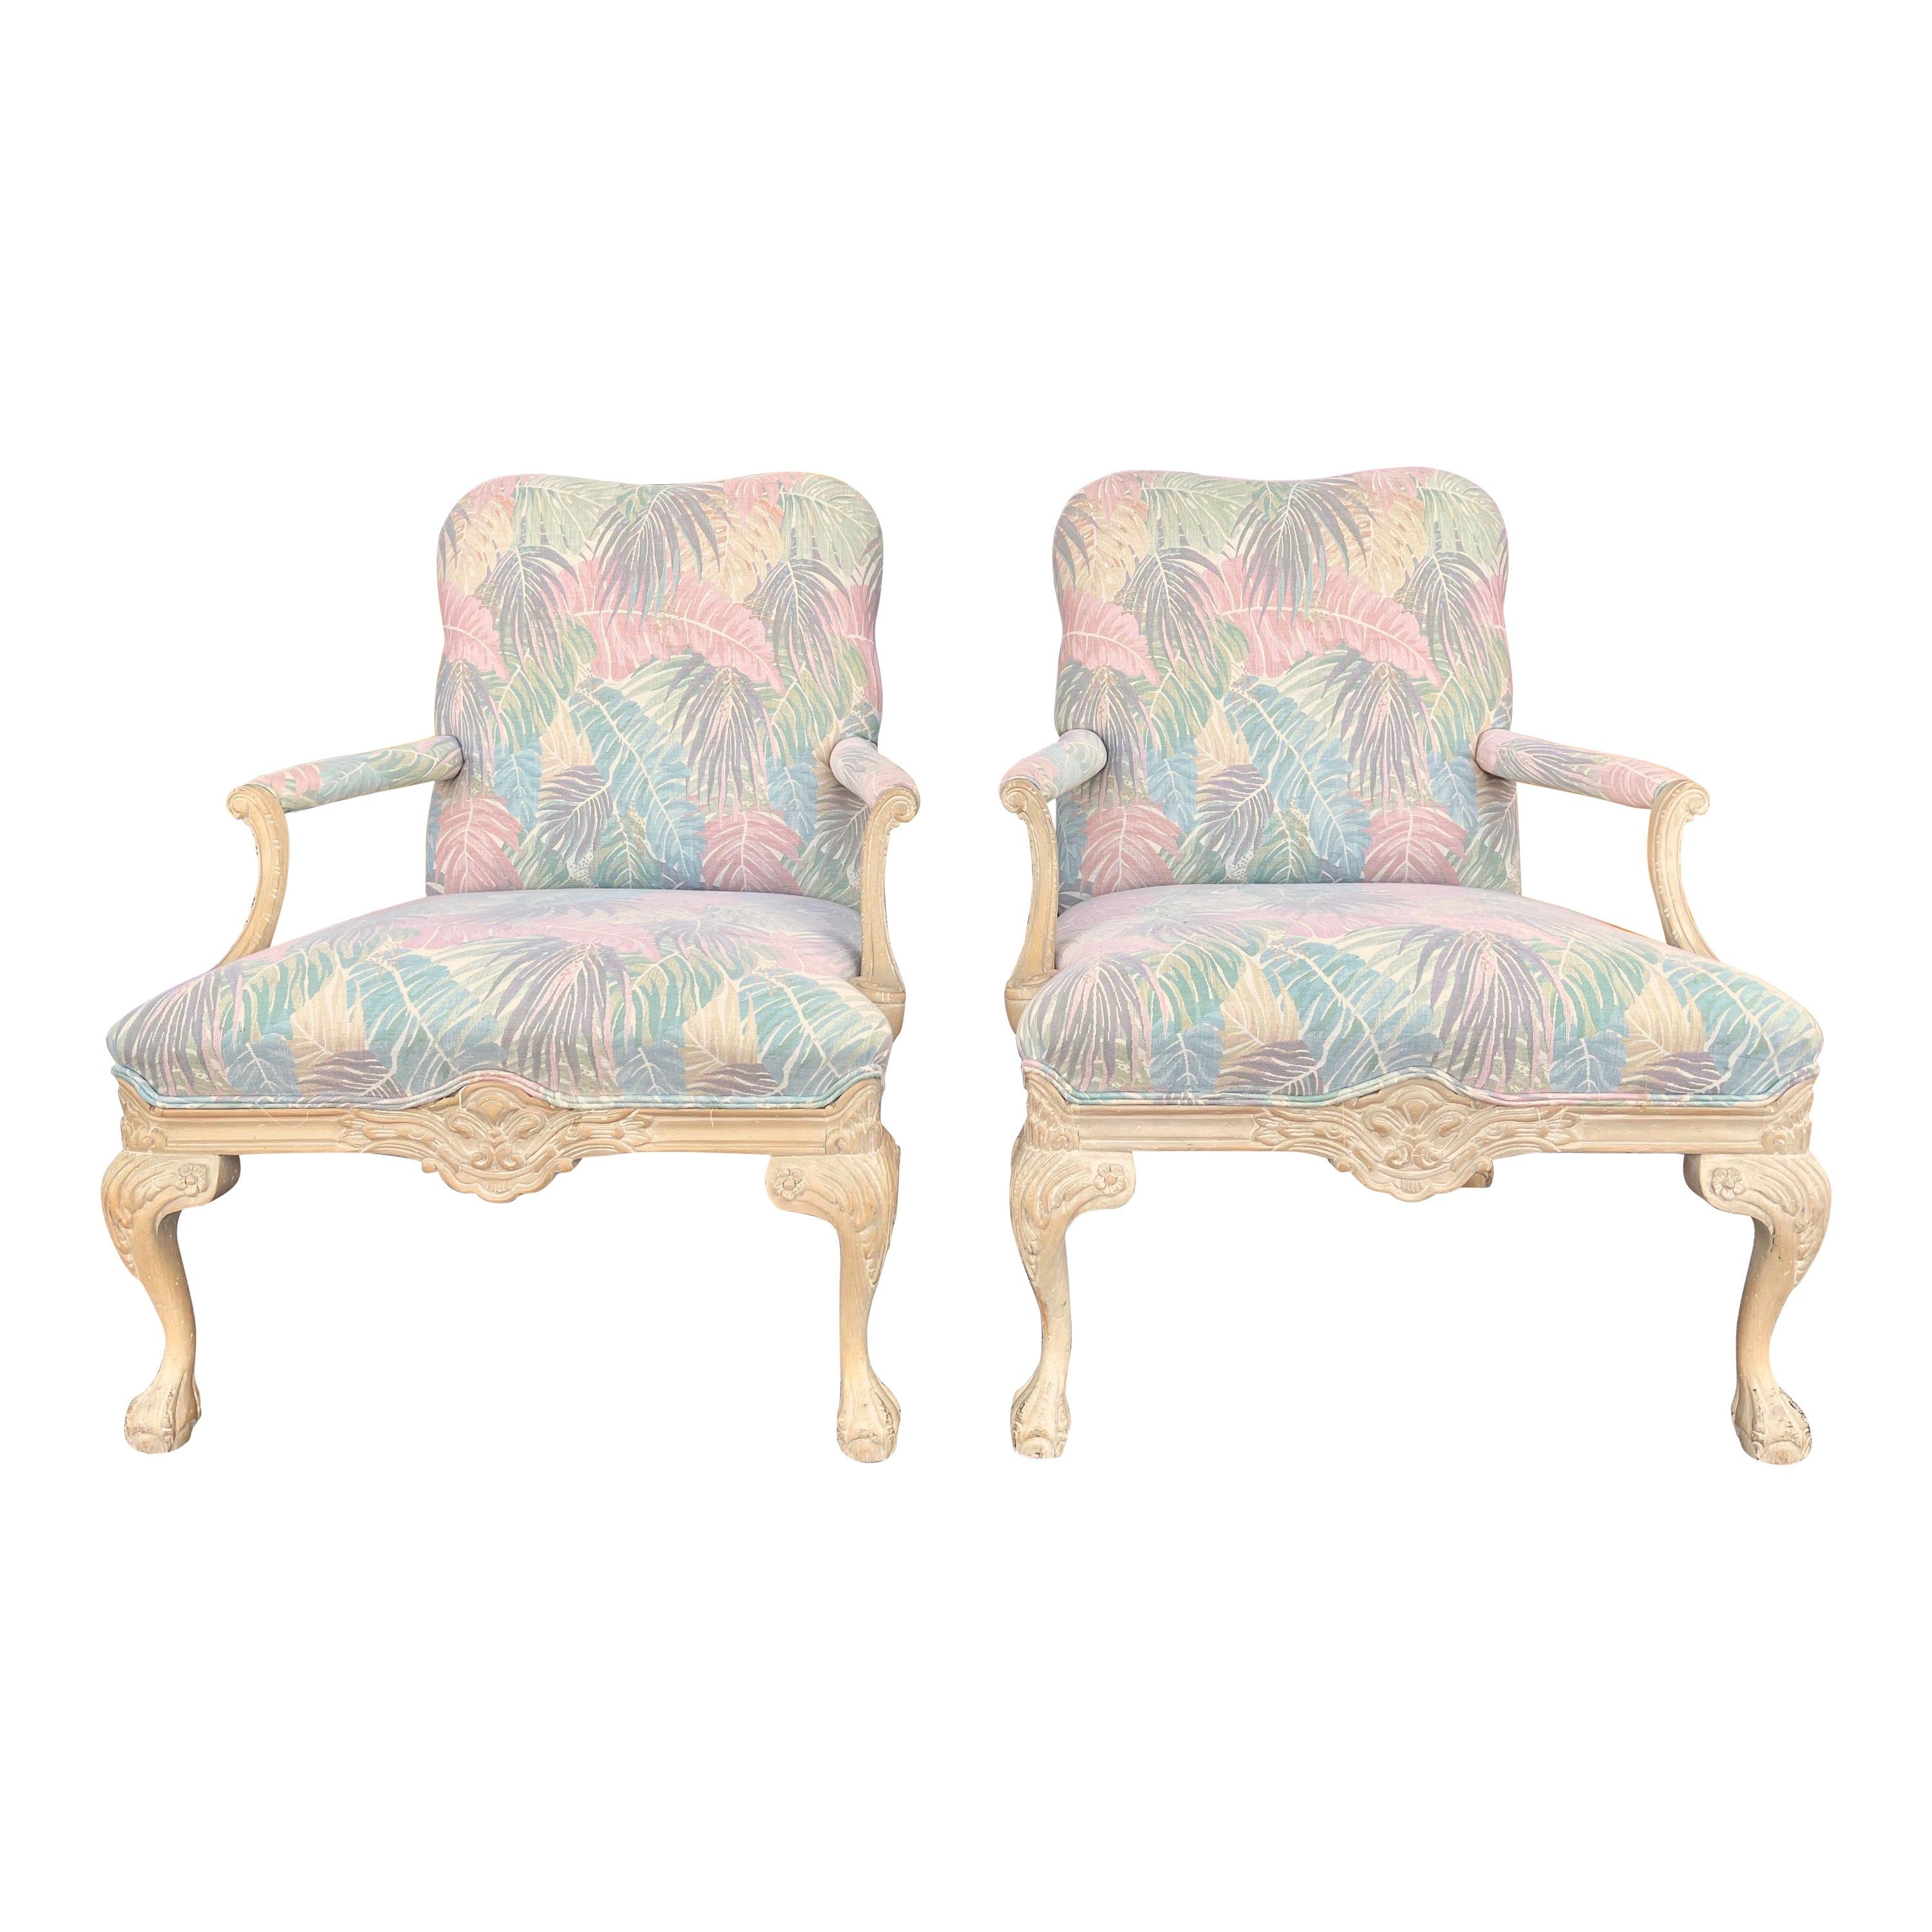 A Pair of Vintage Coastal Style Bergere Armchairs by Sherrill Furniture. C 1980s For Sale